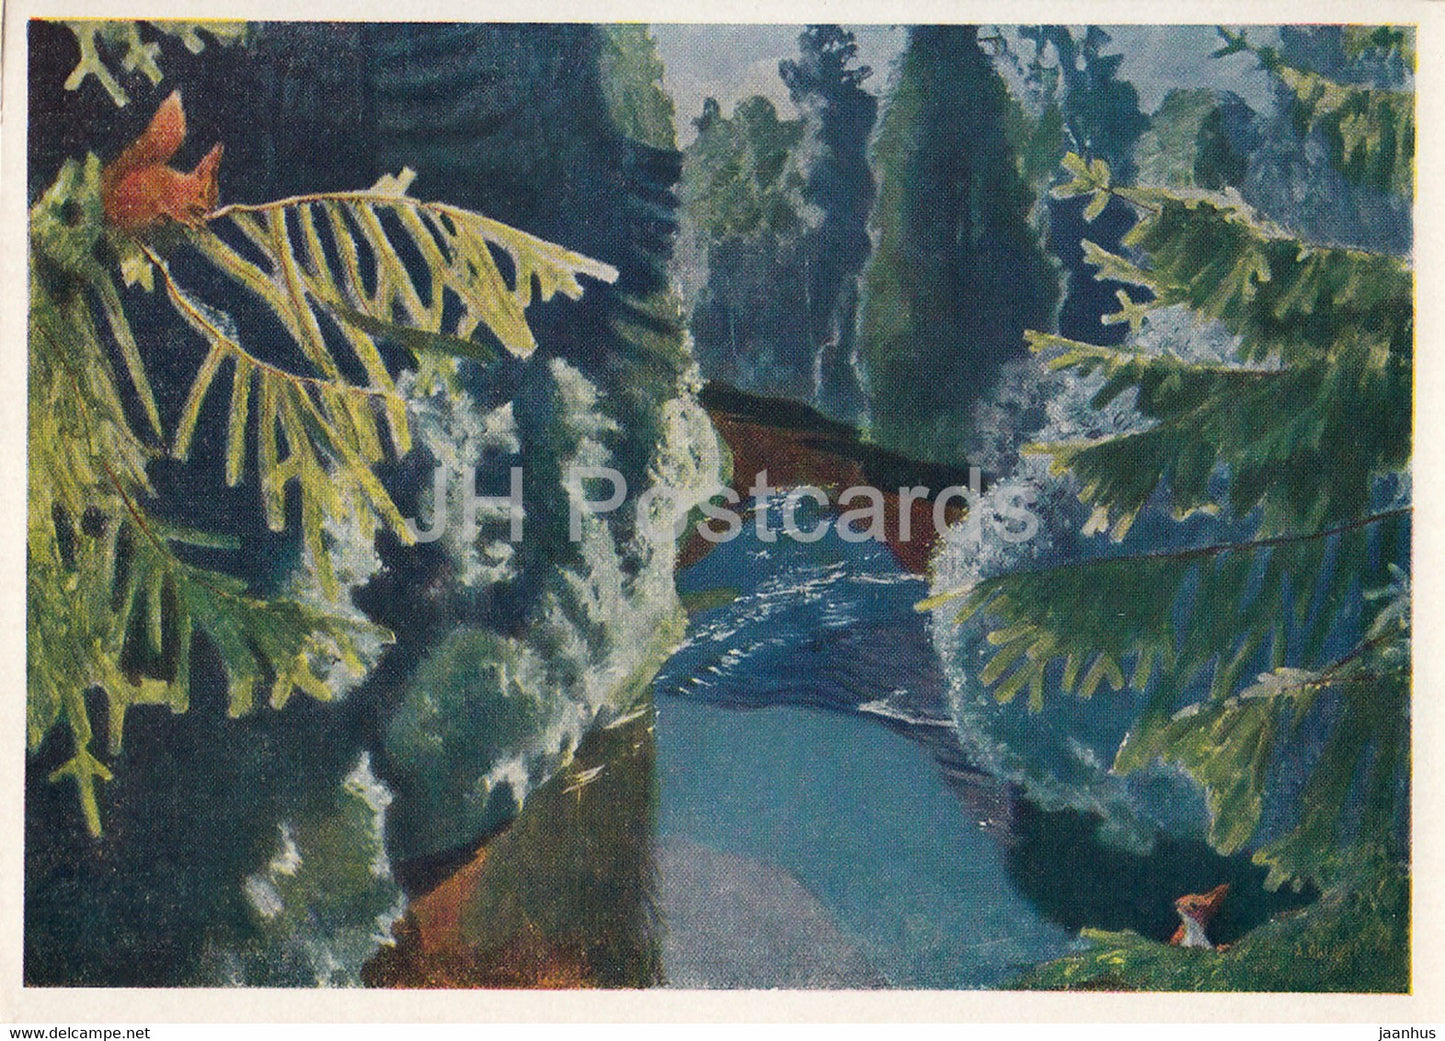 painting by A. Rylov - Forest River - Russian art - 1961 - Russia USSR - unused - JH Postcards